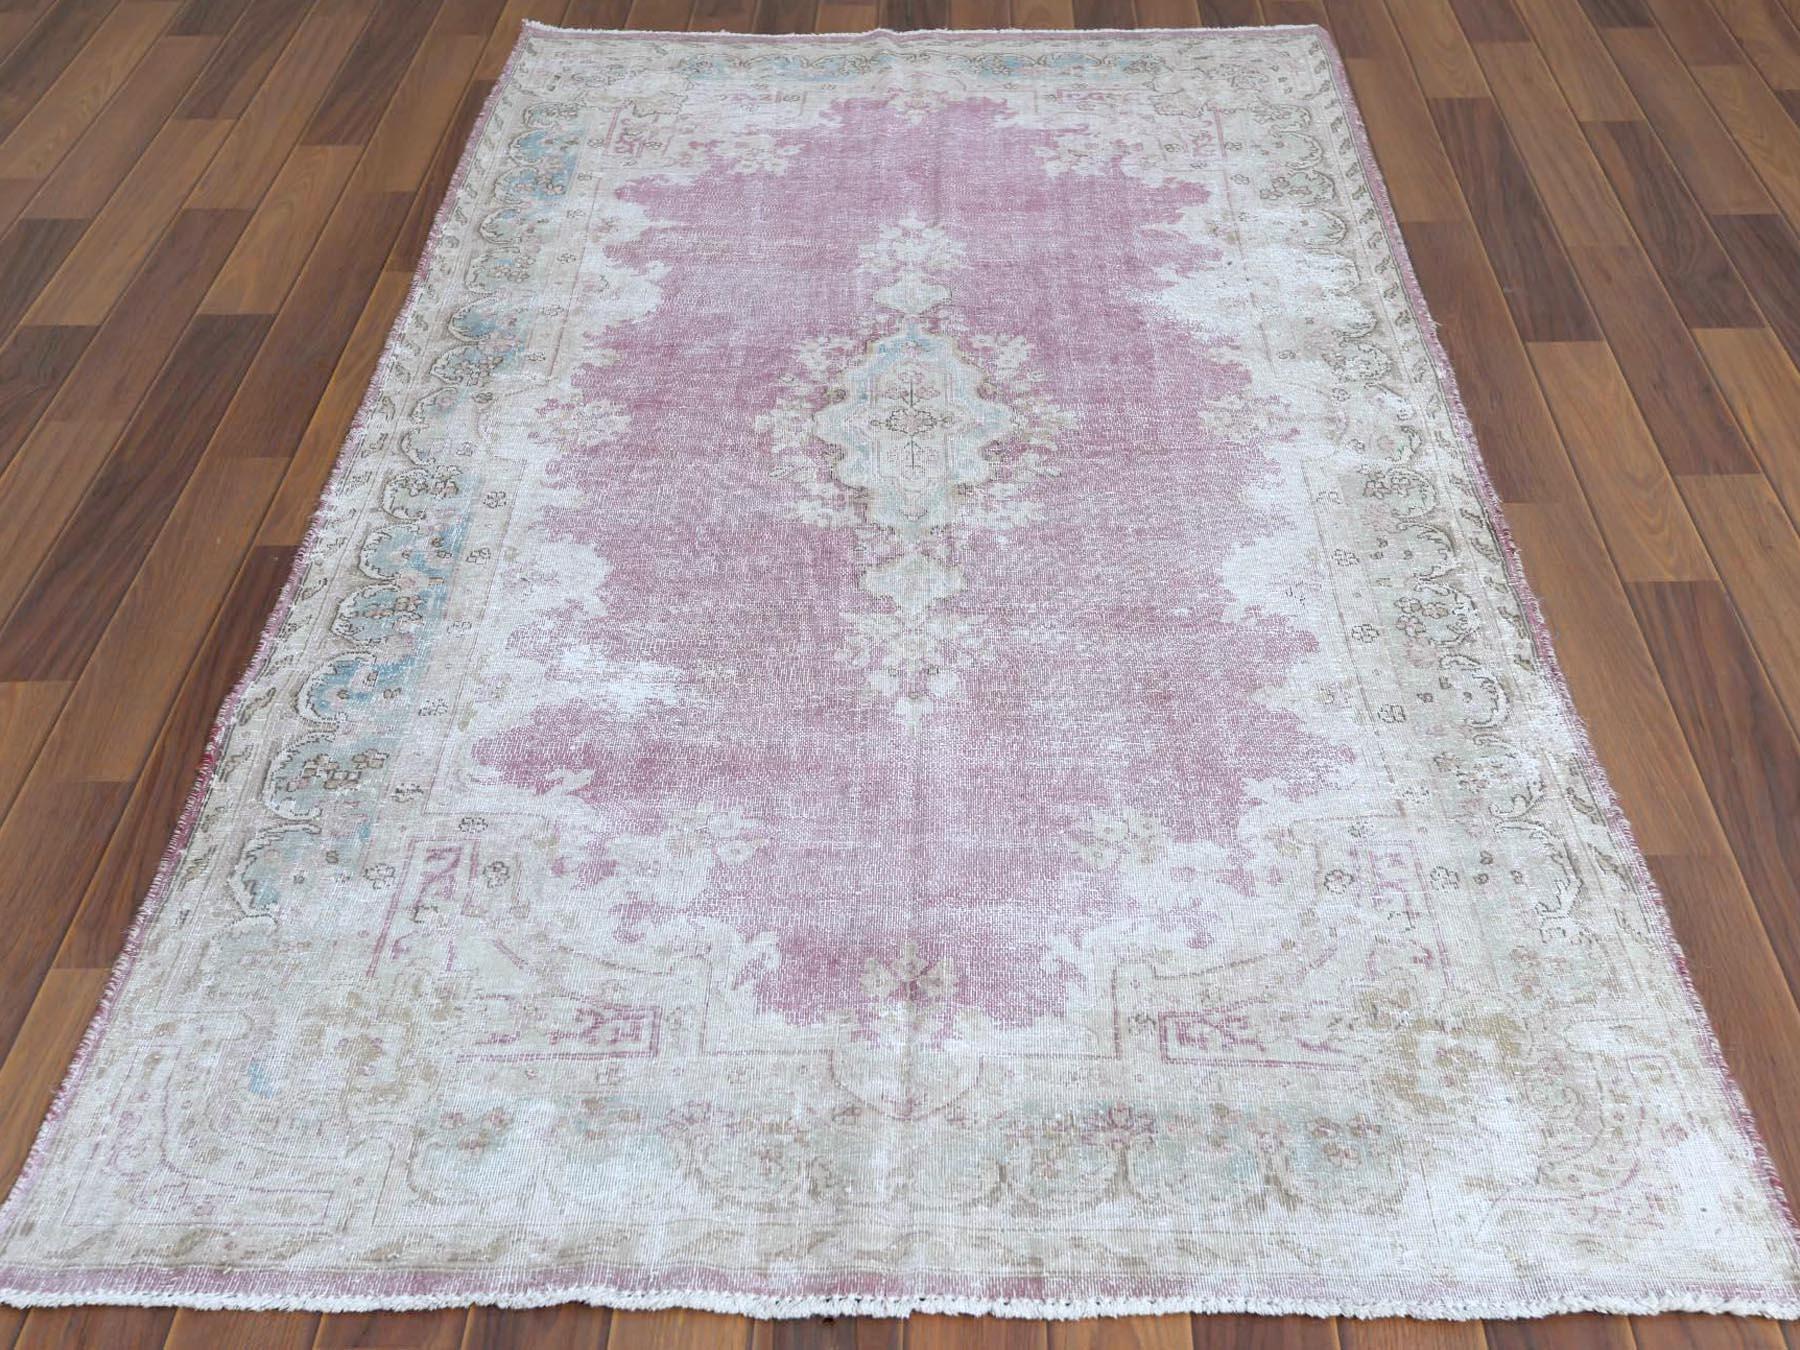 Medieval Washed Out Pink Vintage Persian Kerman Worn Down Beautiful Wool Hand Knotted Rug